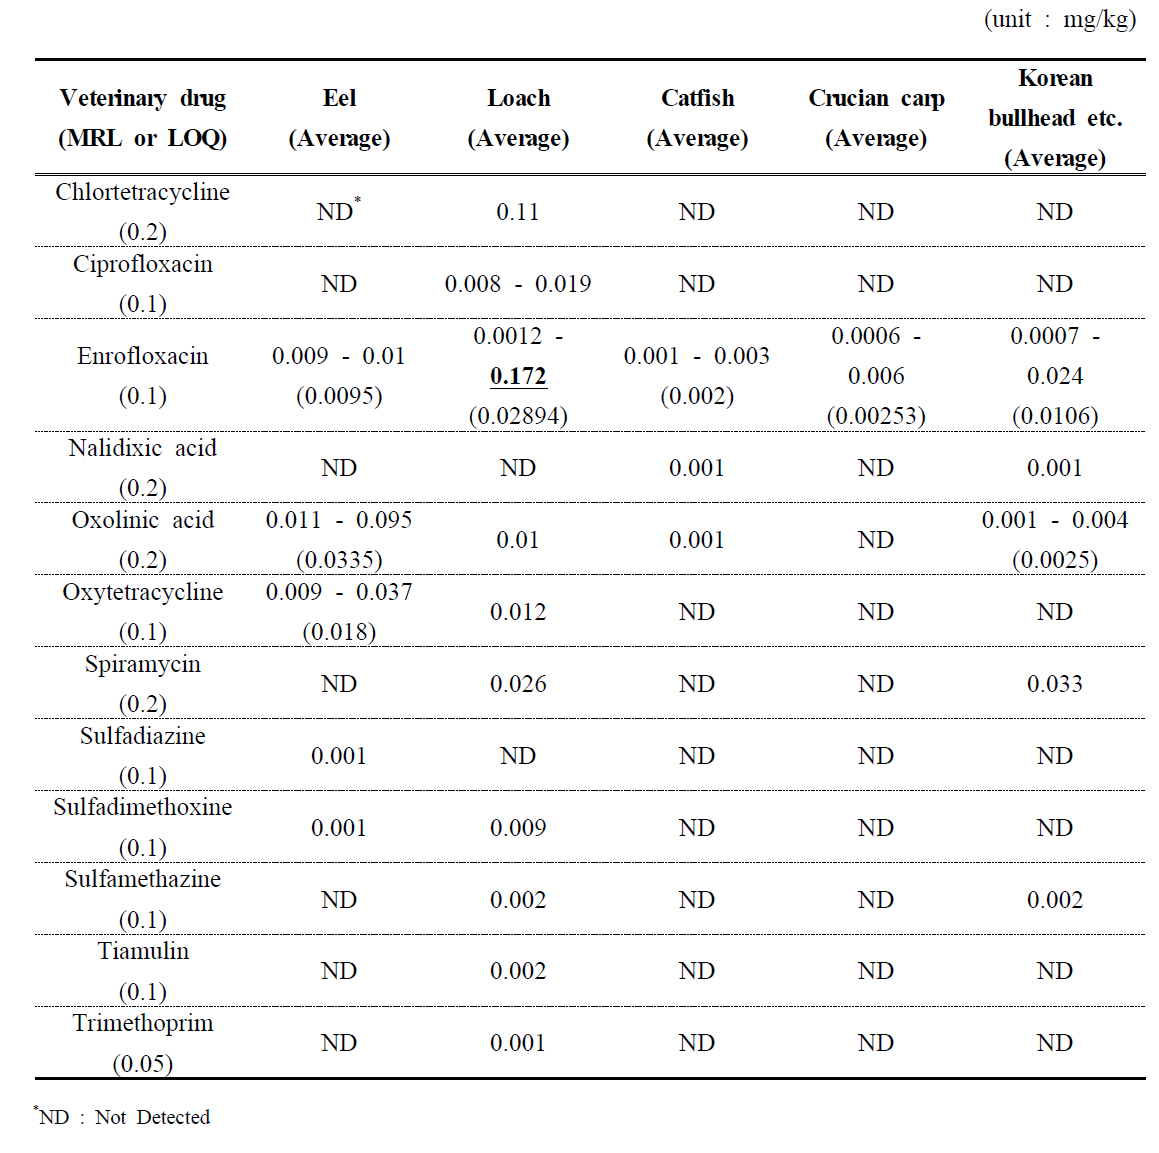 The detection level and average detection level of each veterinary drugs in freshwater fish